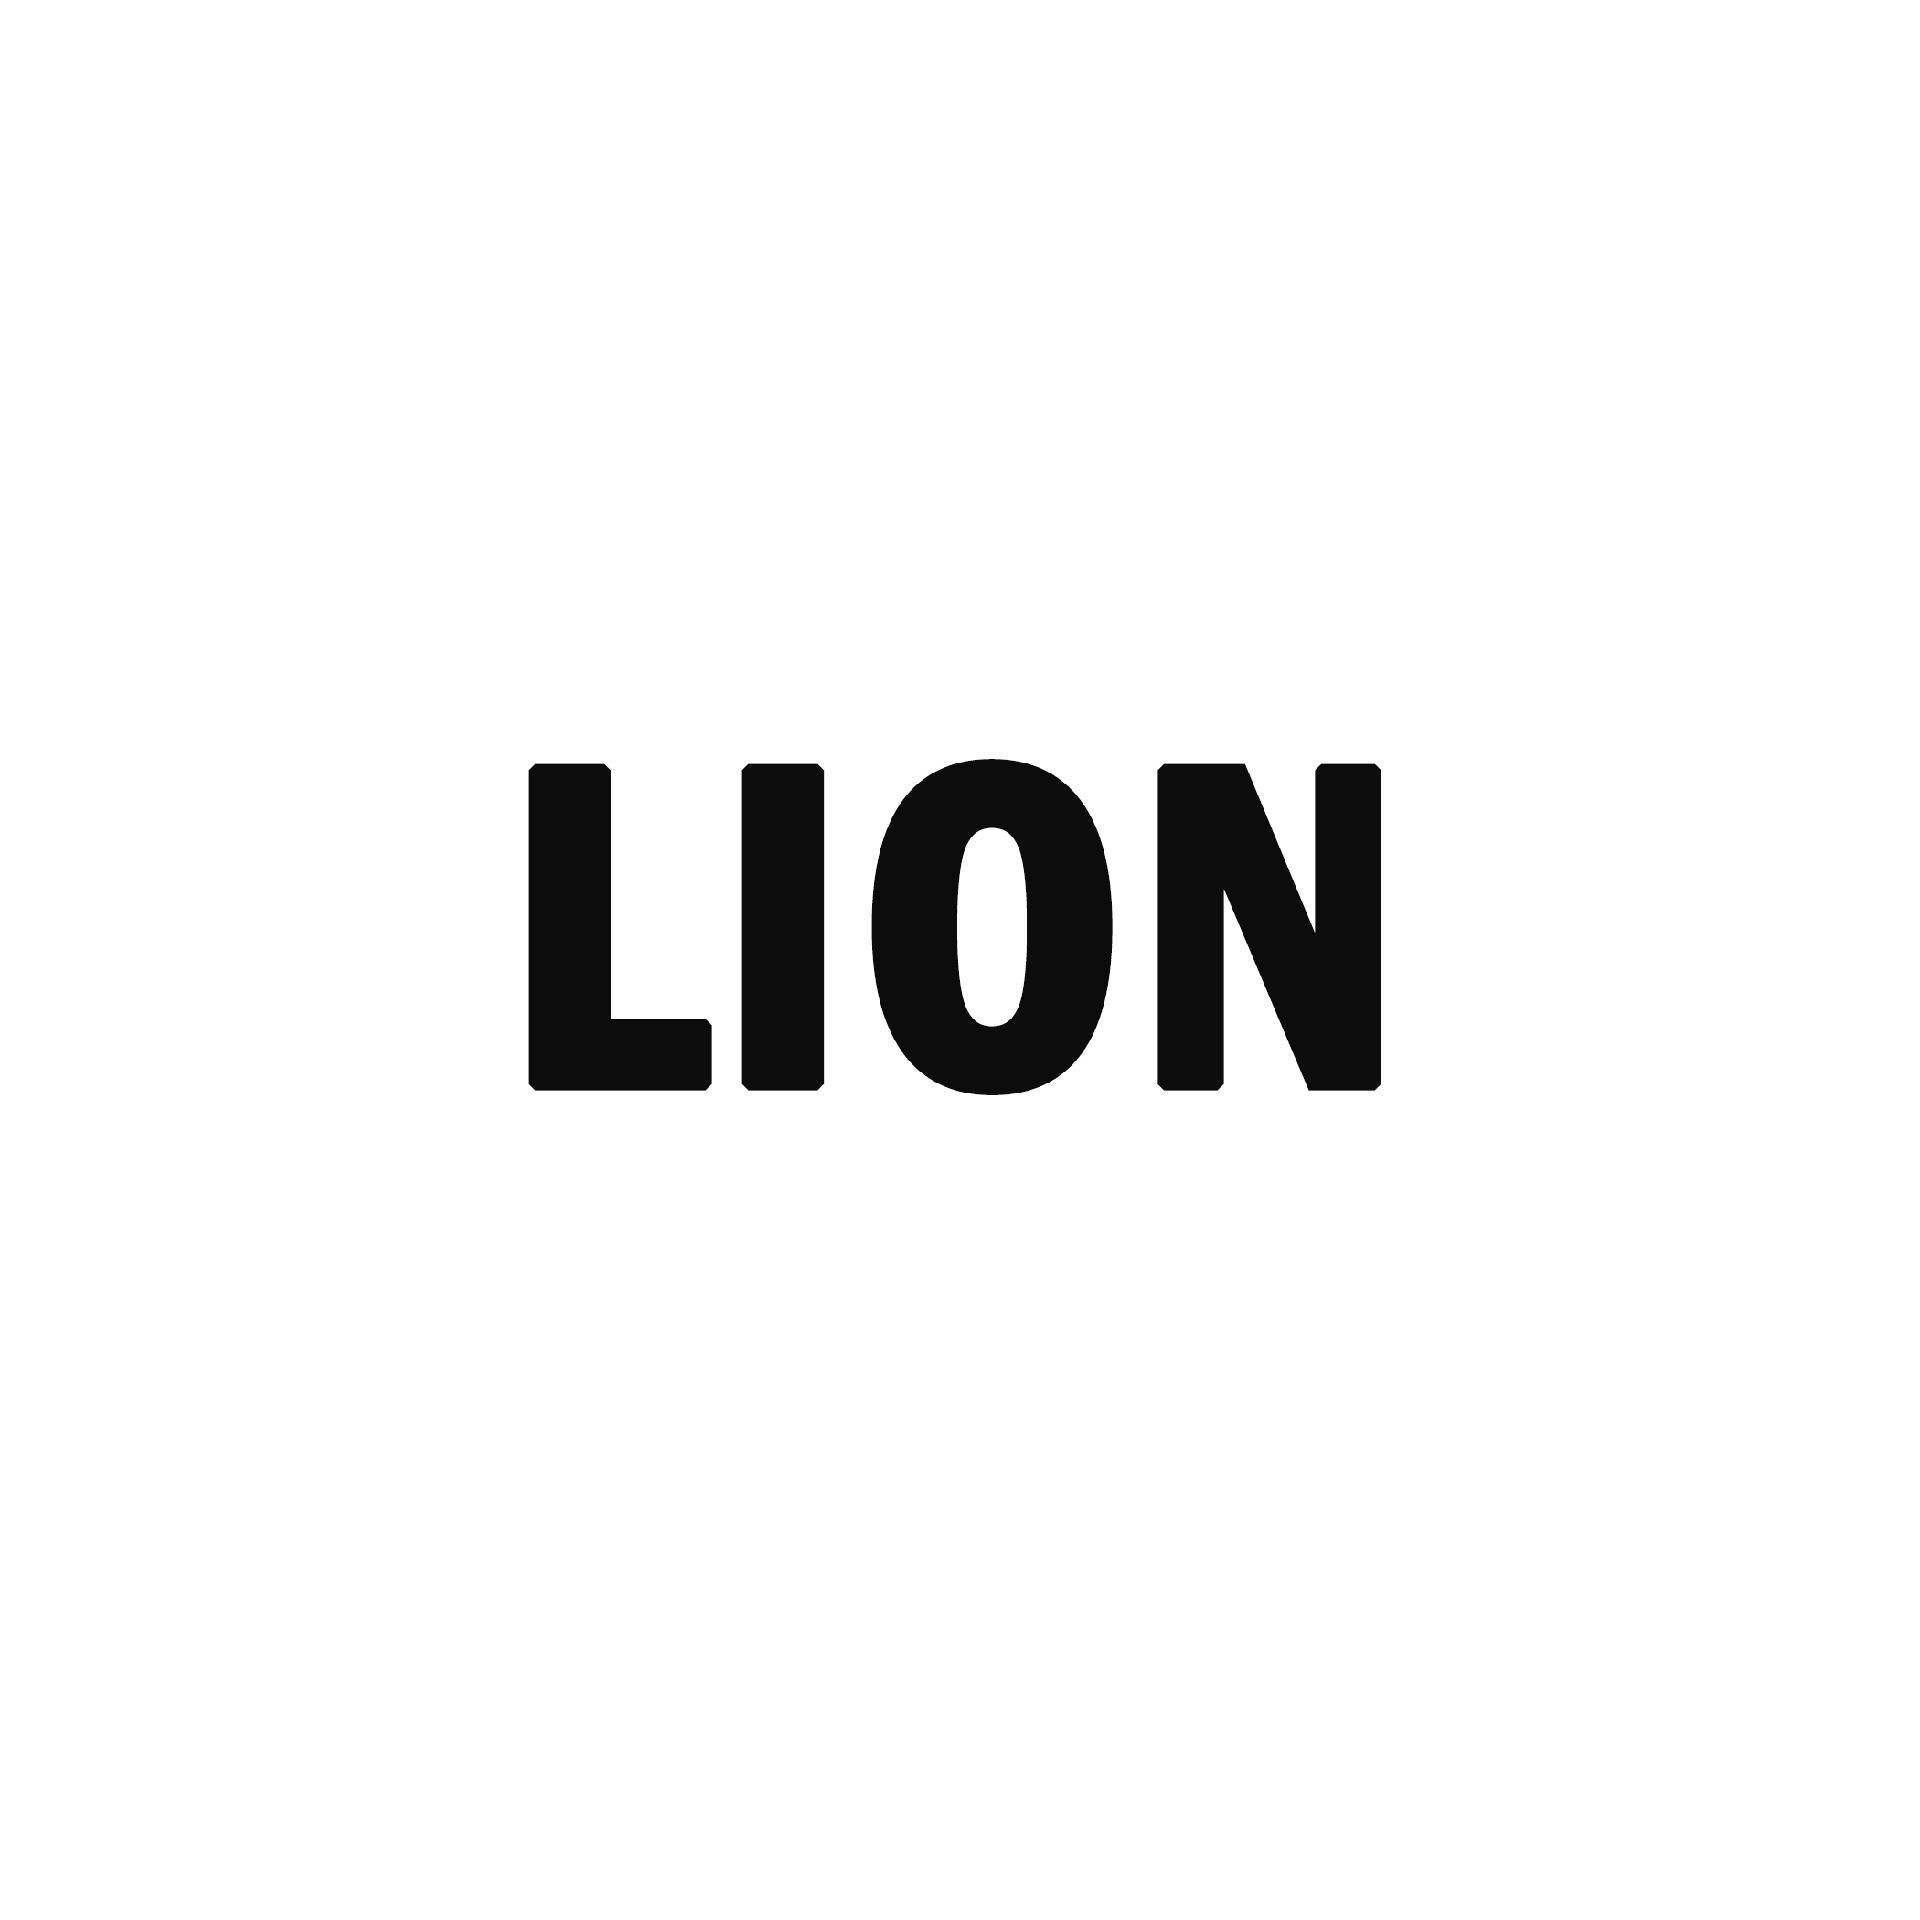 Product Brand: Lion